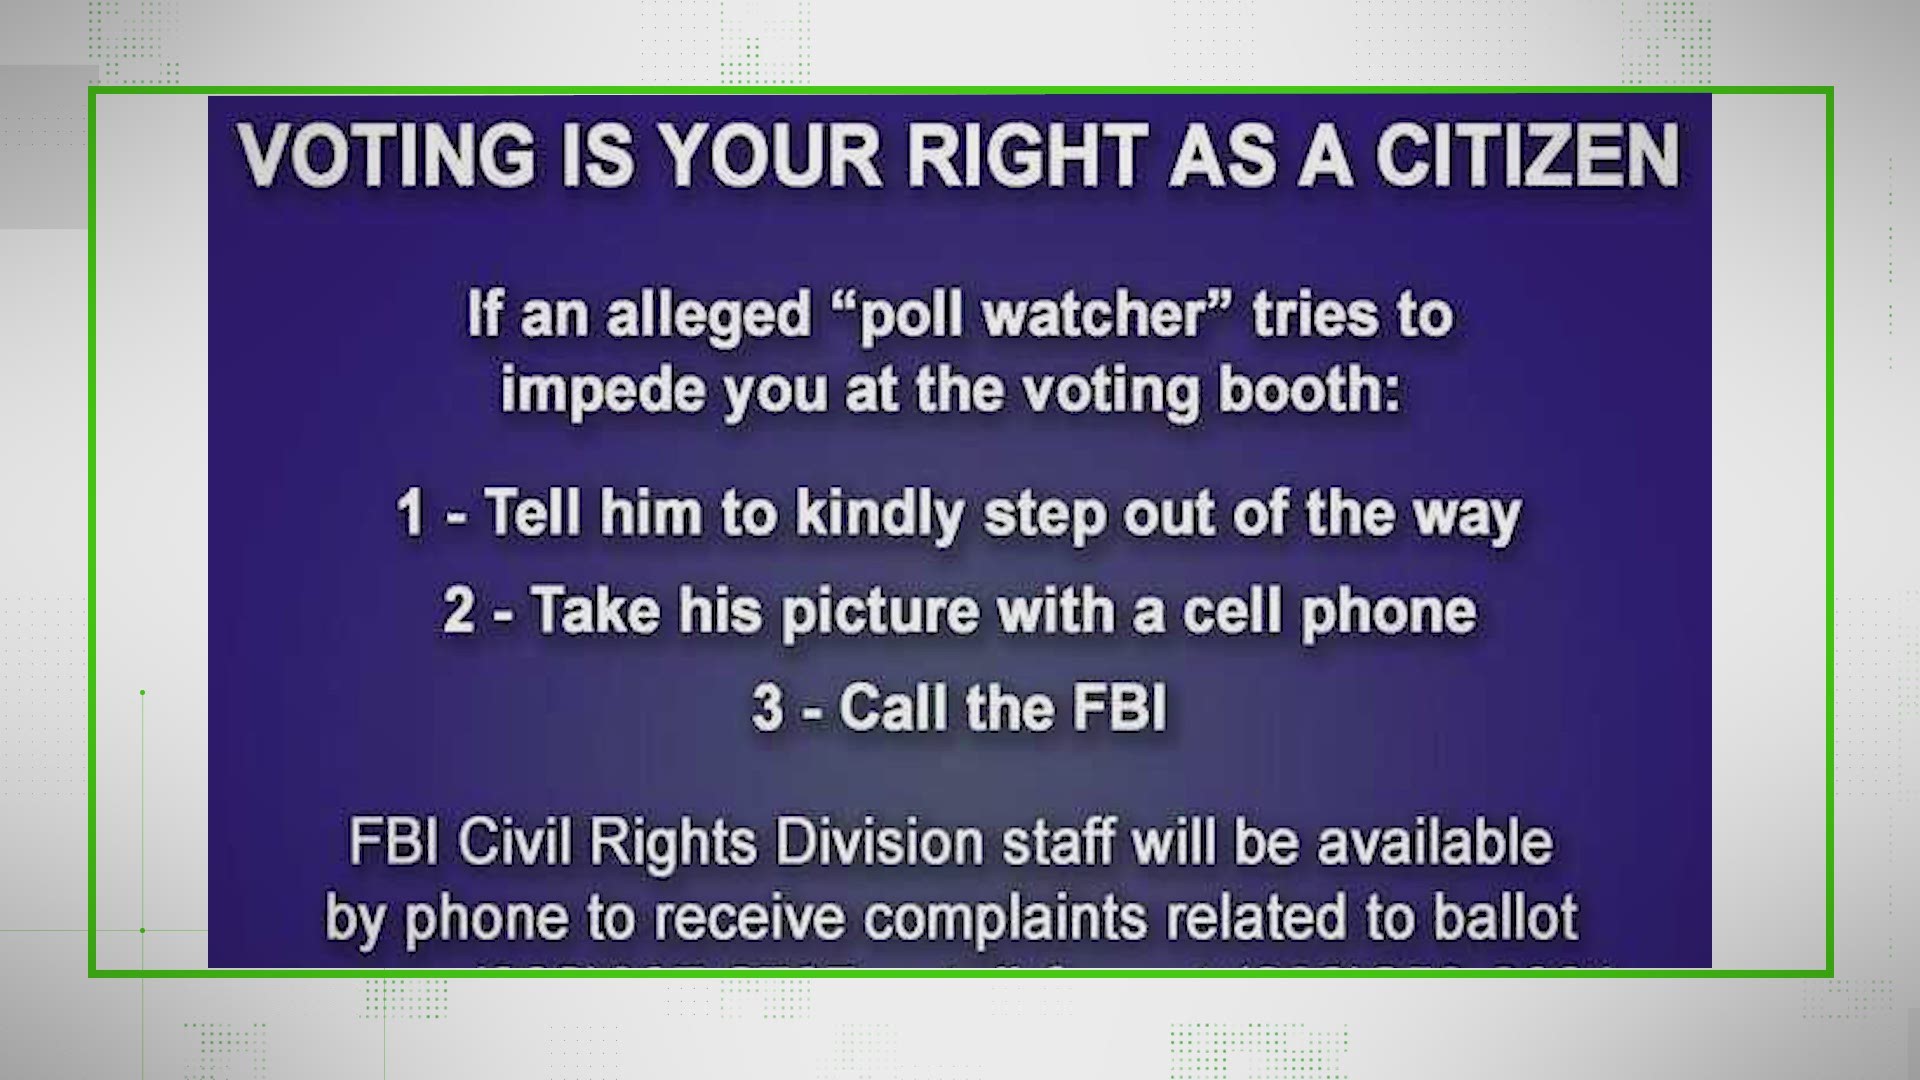 An internet meme urges Americans to call the FBI if they fear 'an alleged poll watcher' is impeding their right to vote at the polls.